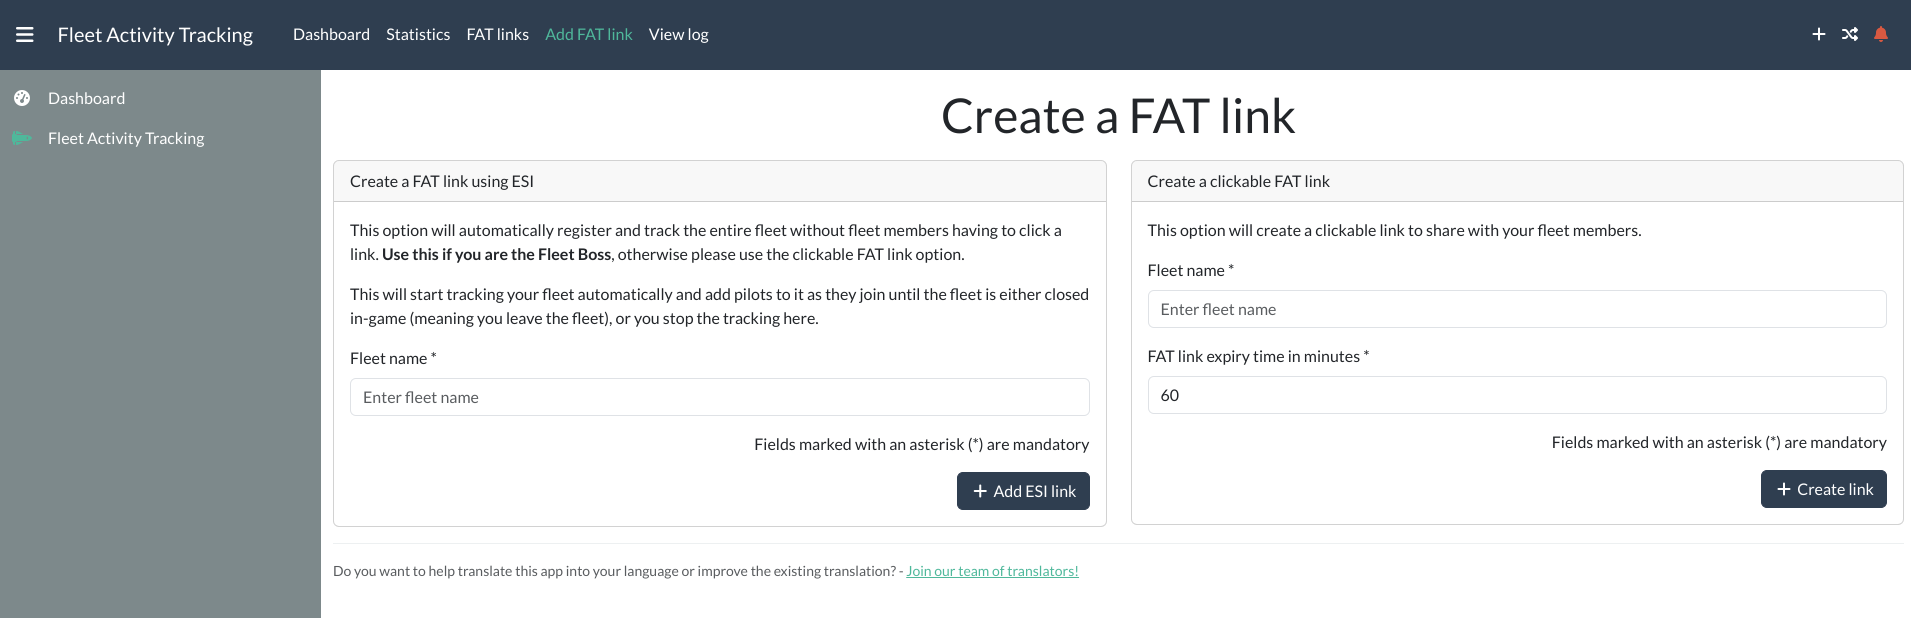 Add Fat Link View for FCs